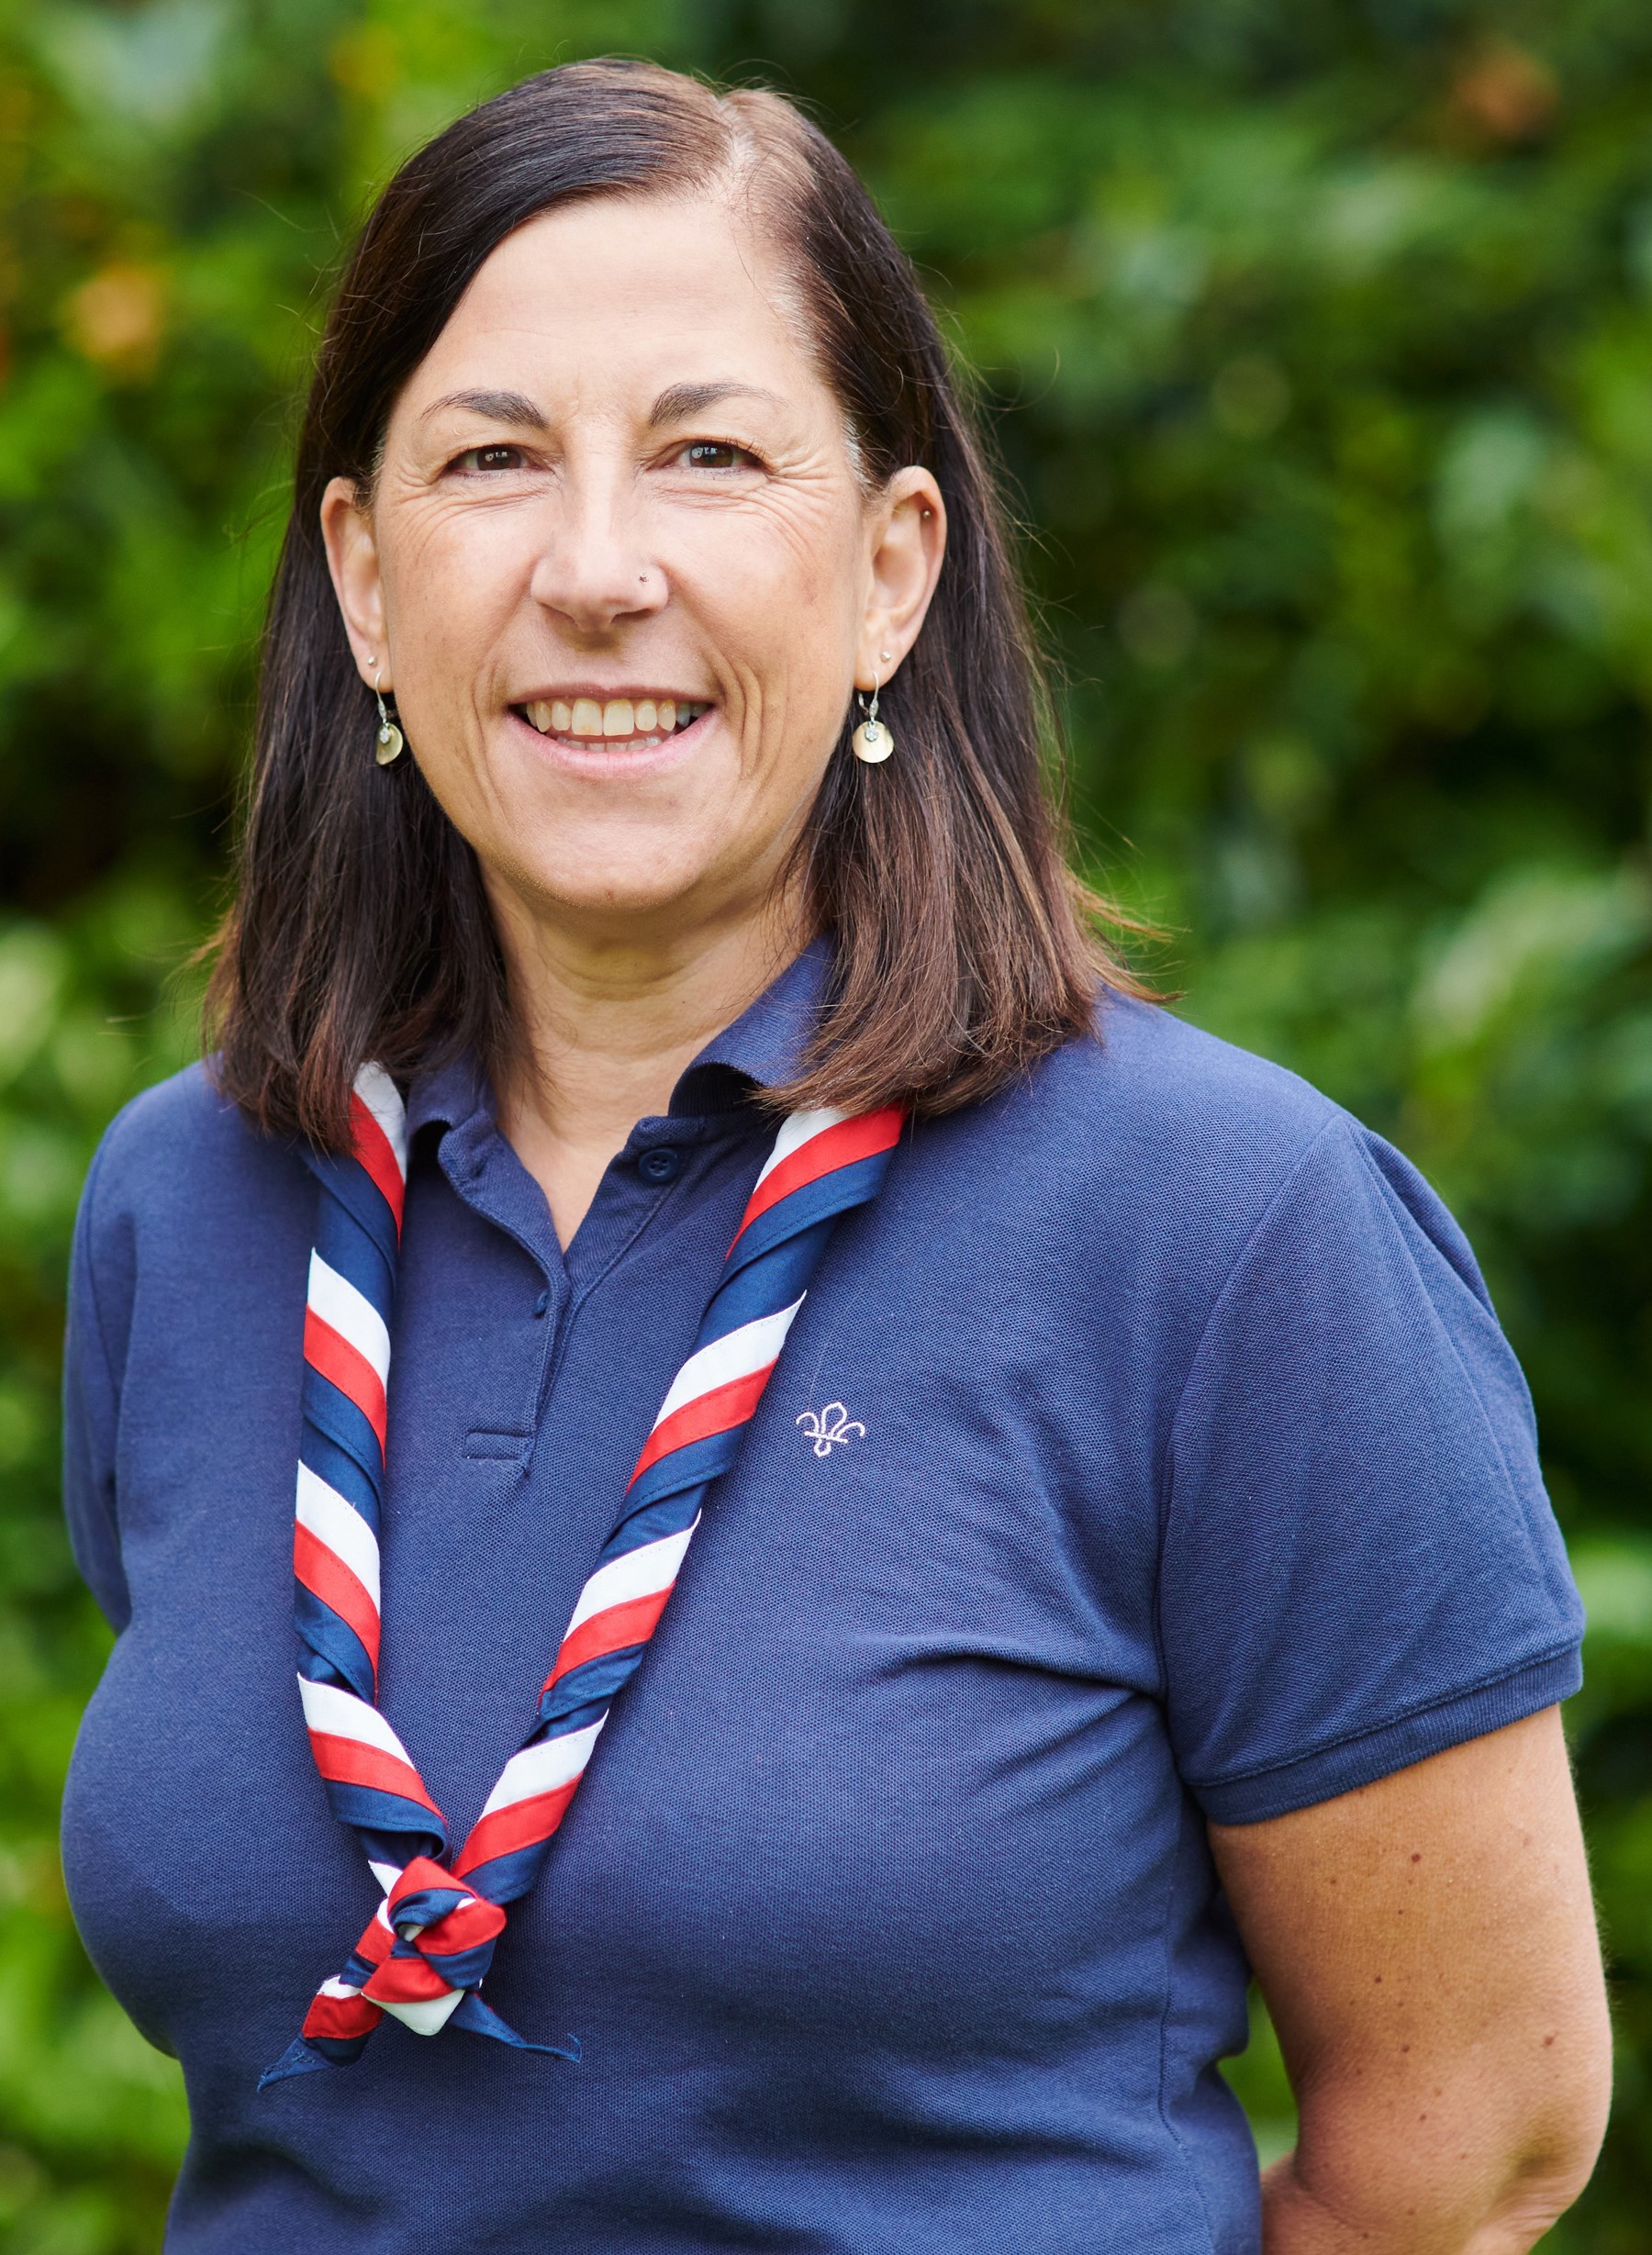 Liz Walker smiling at the camera wearing a navy Scouts polo shirt and stripy scarf